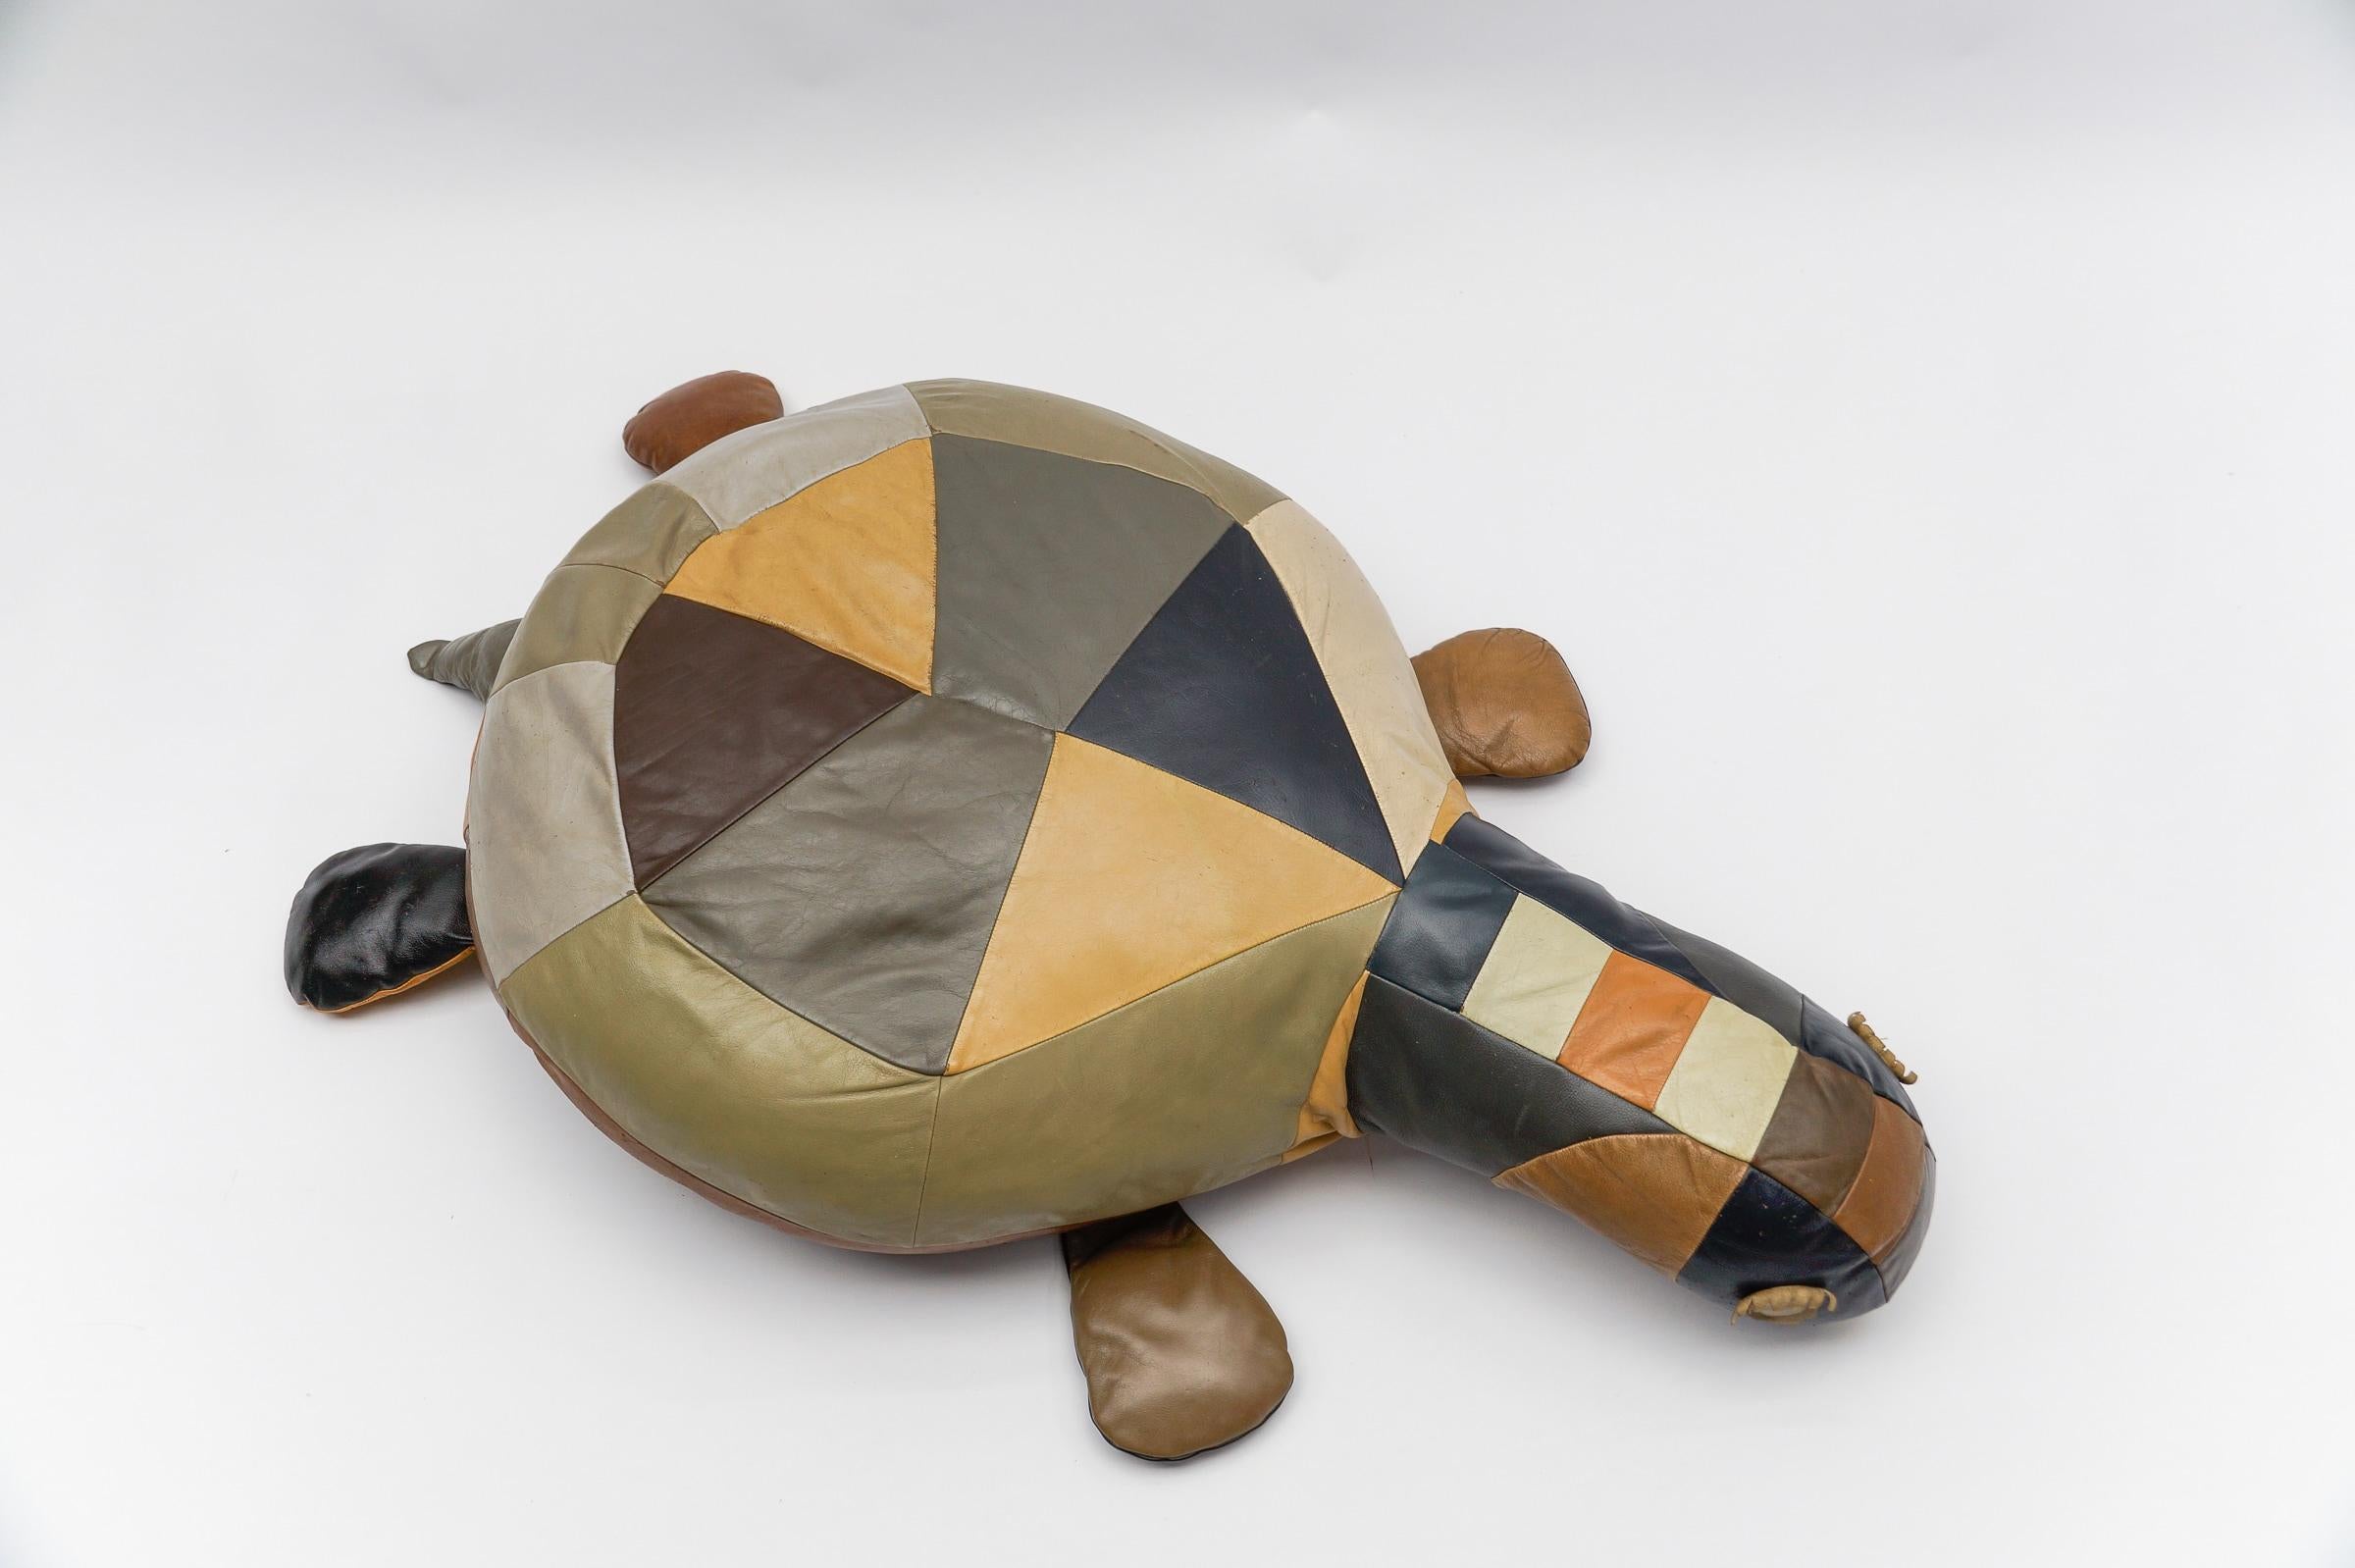 Set of 3 Leather Patchwork Turtle Poufs - Mid-Century Modern, Switzerland, 1960s For Sale 1